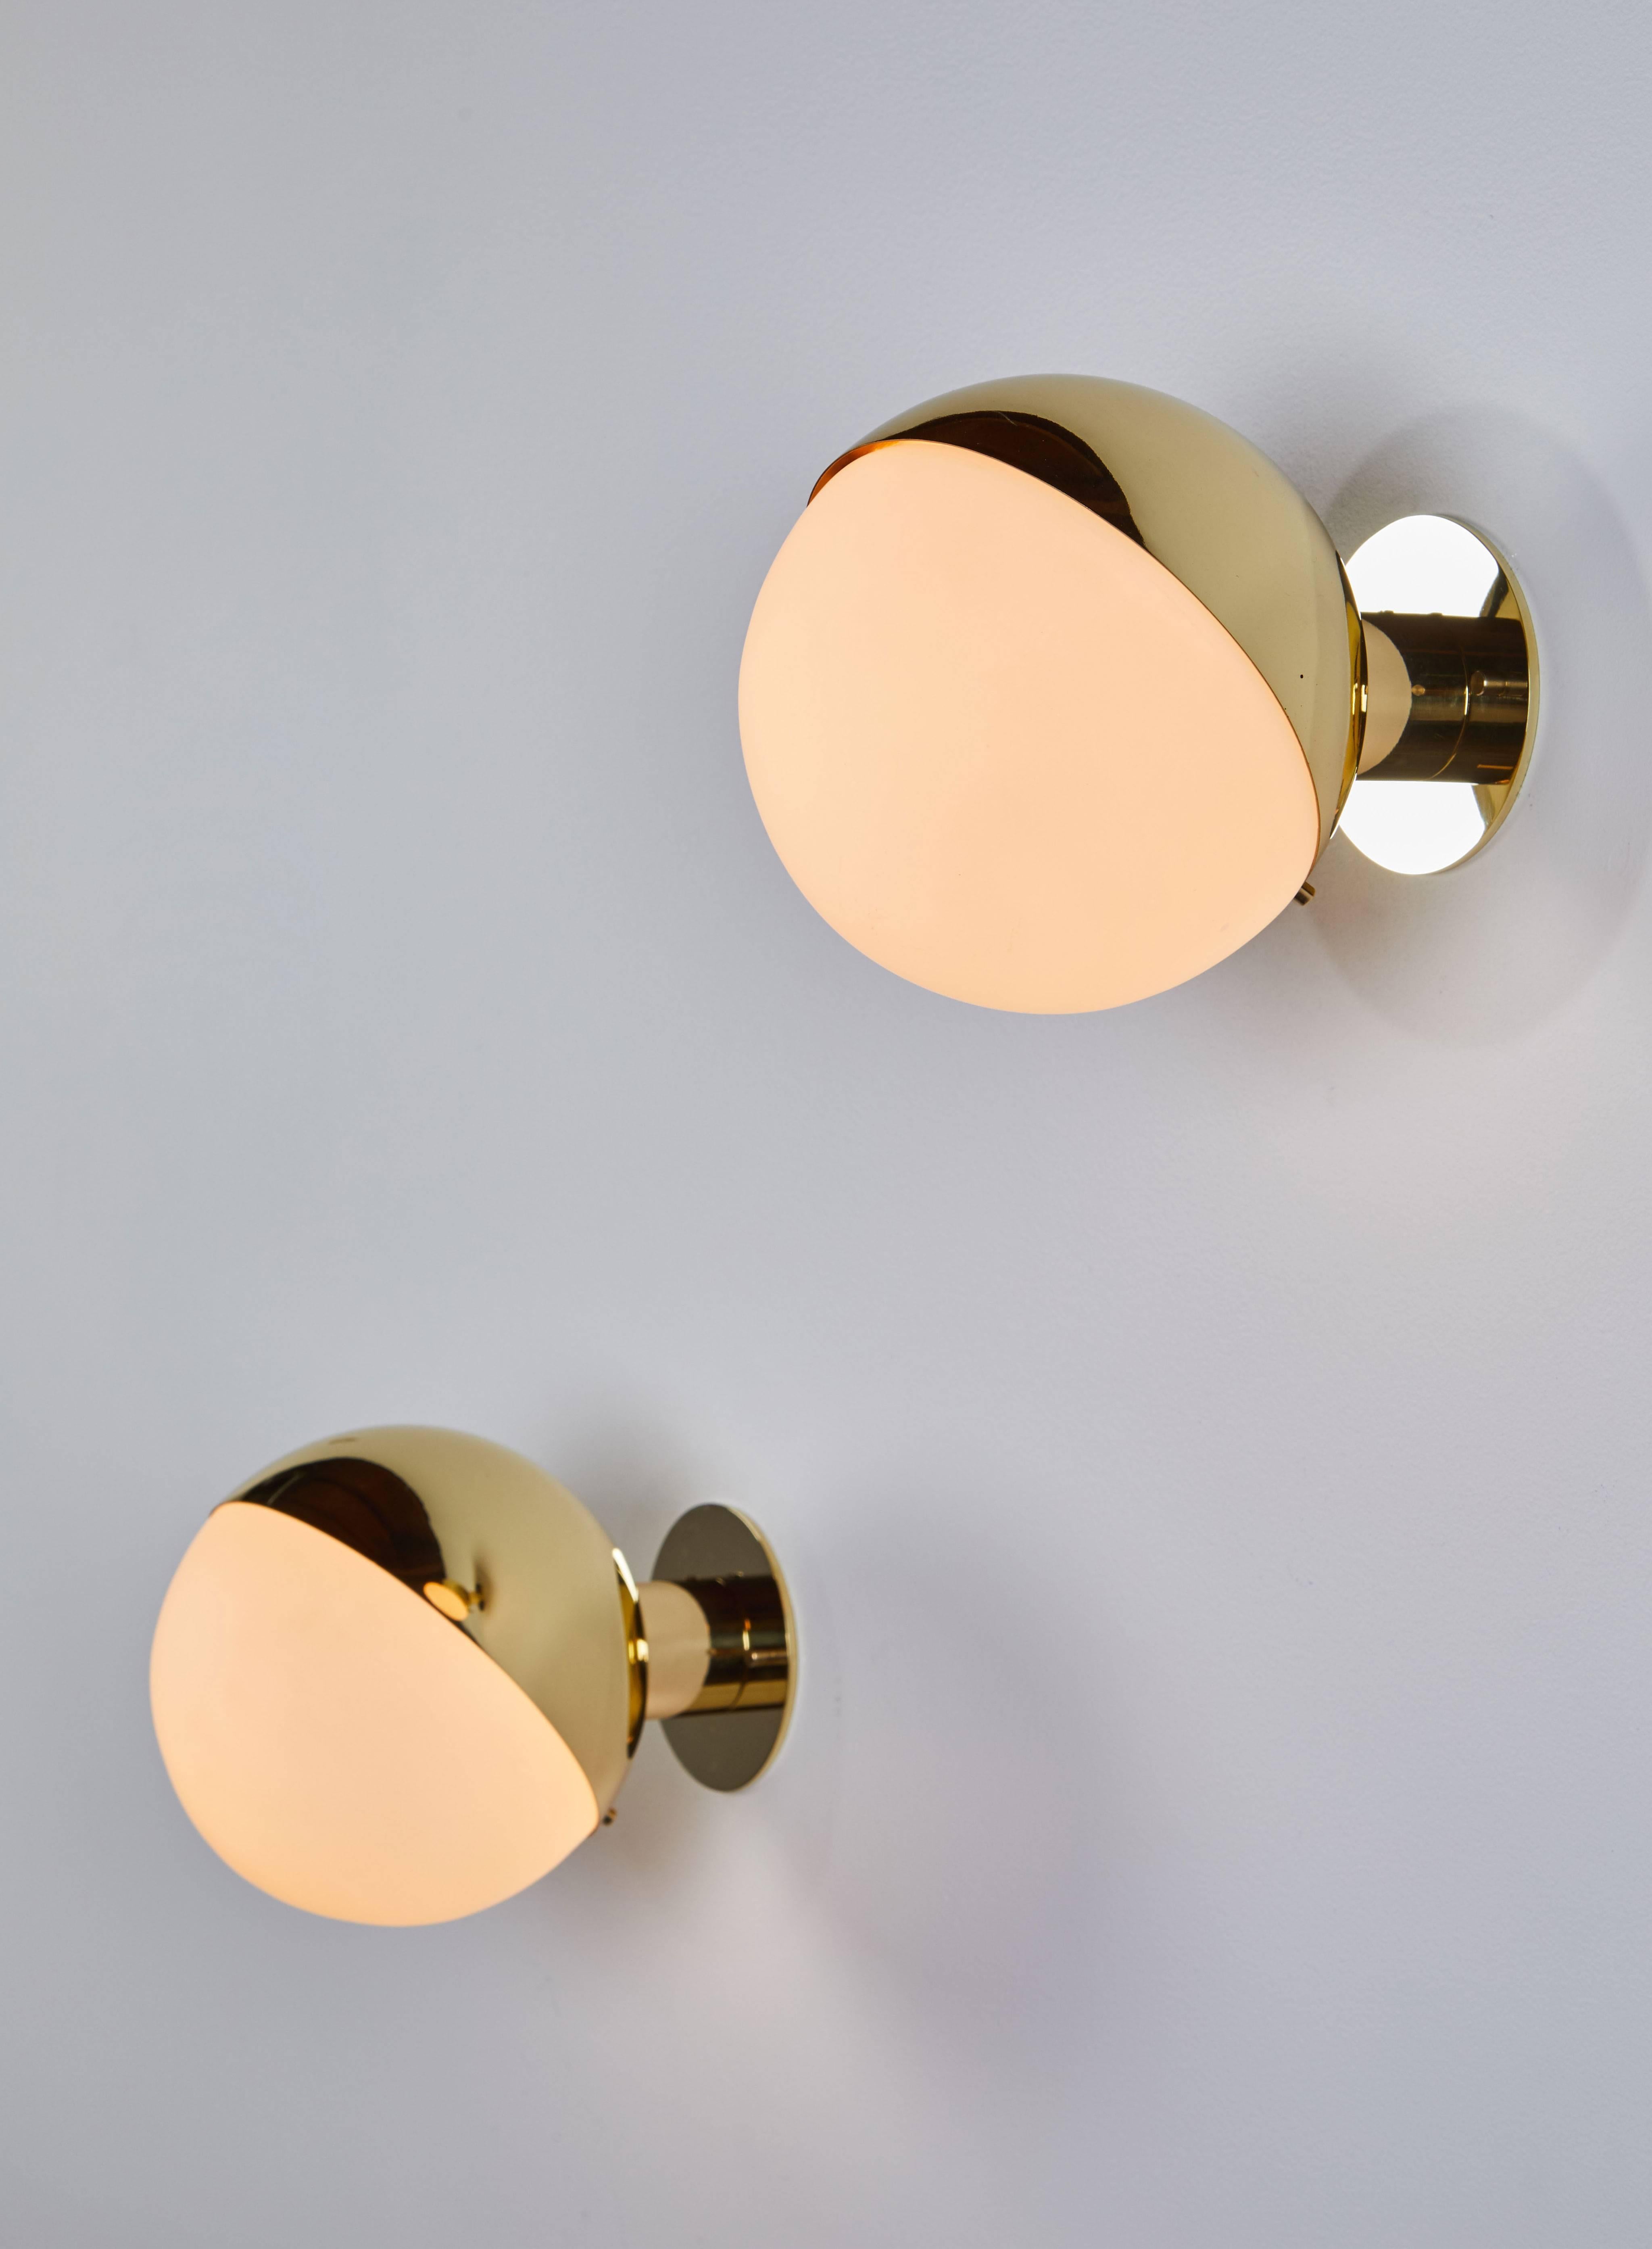 Pair of brass and opaline glass sconces manufactured by Stilnovo in Italy circa 1950's. Wired for US junction boxes. Custom backplates.  Each sconce takes one E27 75w maximum bulb